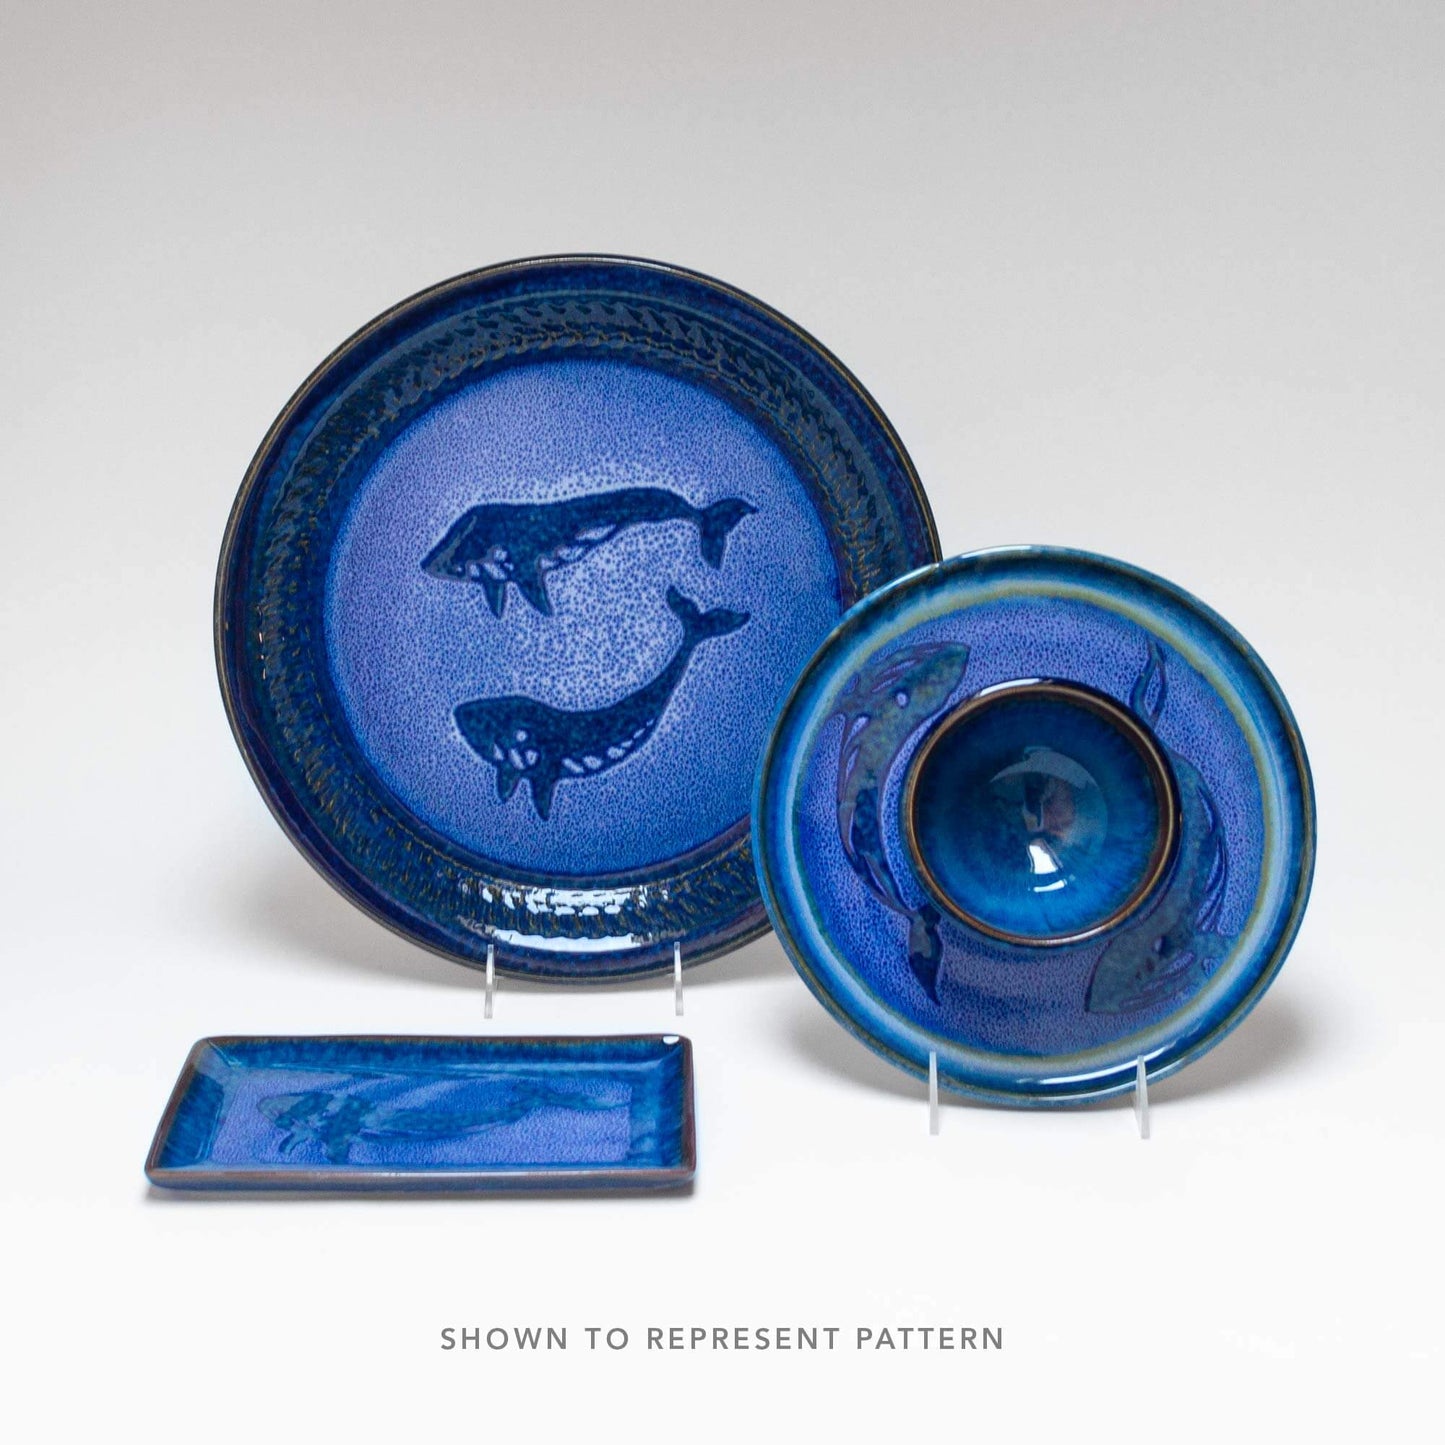 Handmade Pottery Pie Plate in Blue Whale pattern made by Georgetown Pottery in Maine